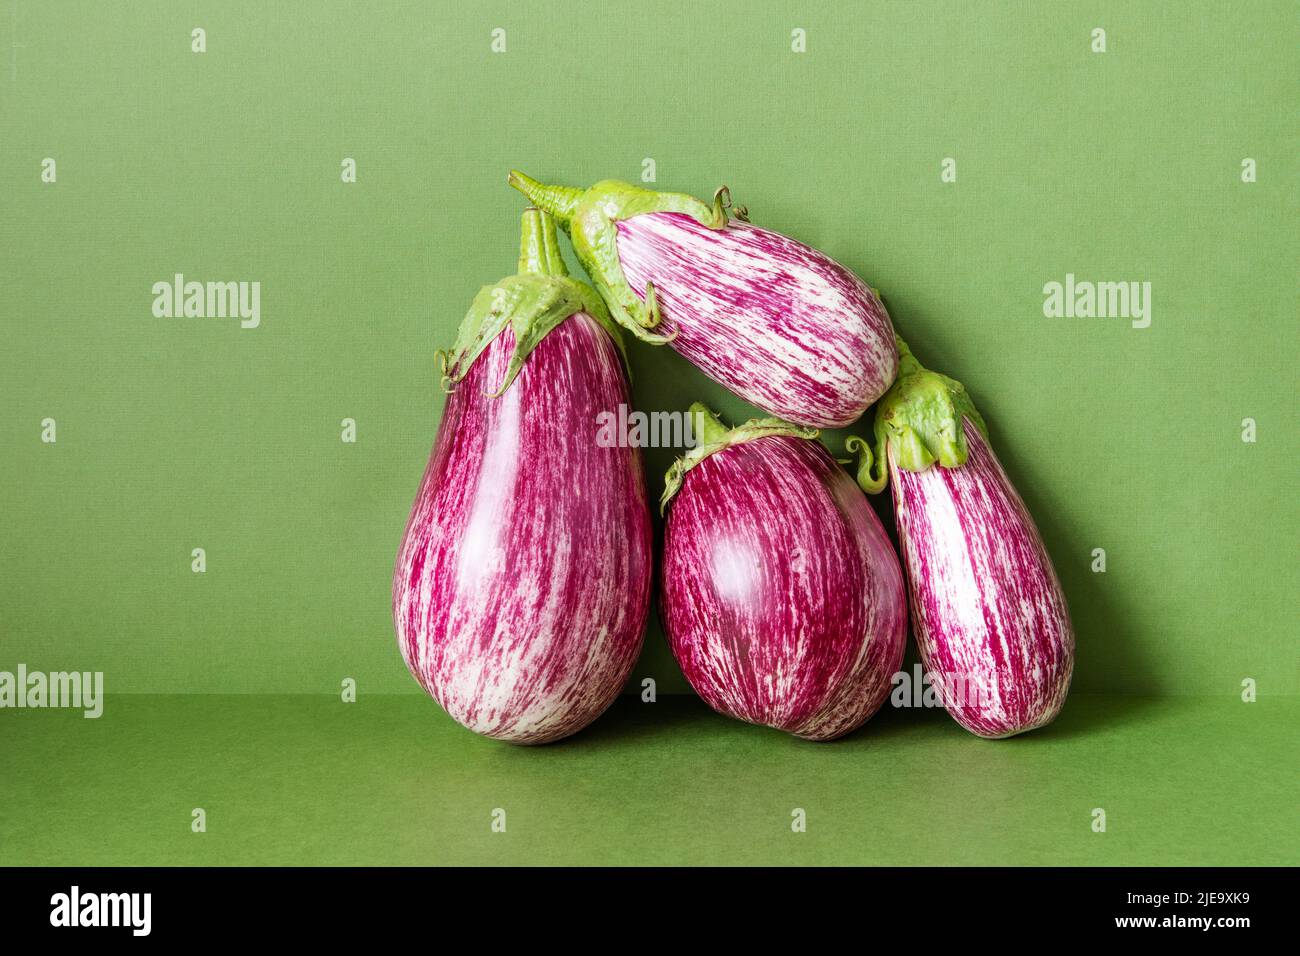 Three ripe eggplants with beautiful purple and pink striped patterns on green background. Natural organic farm vegetable food concept. Stock Photo